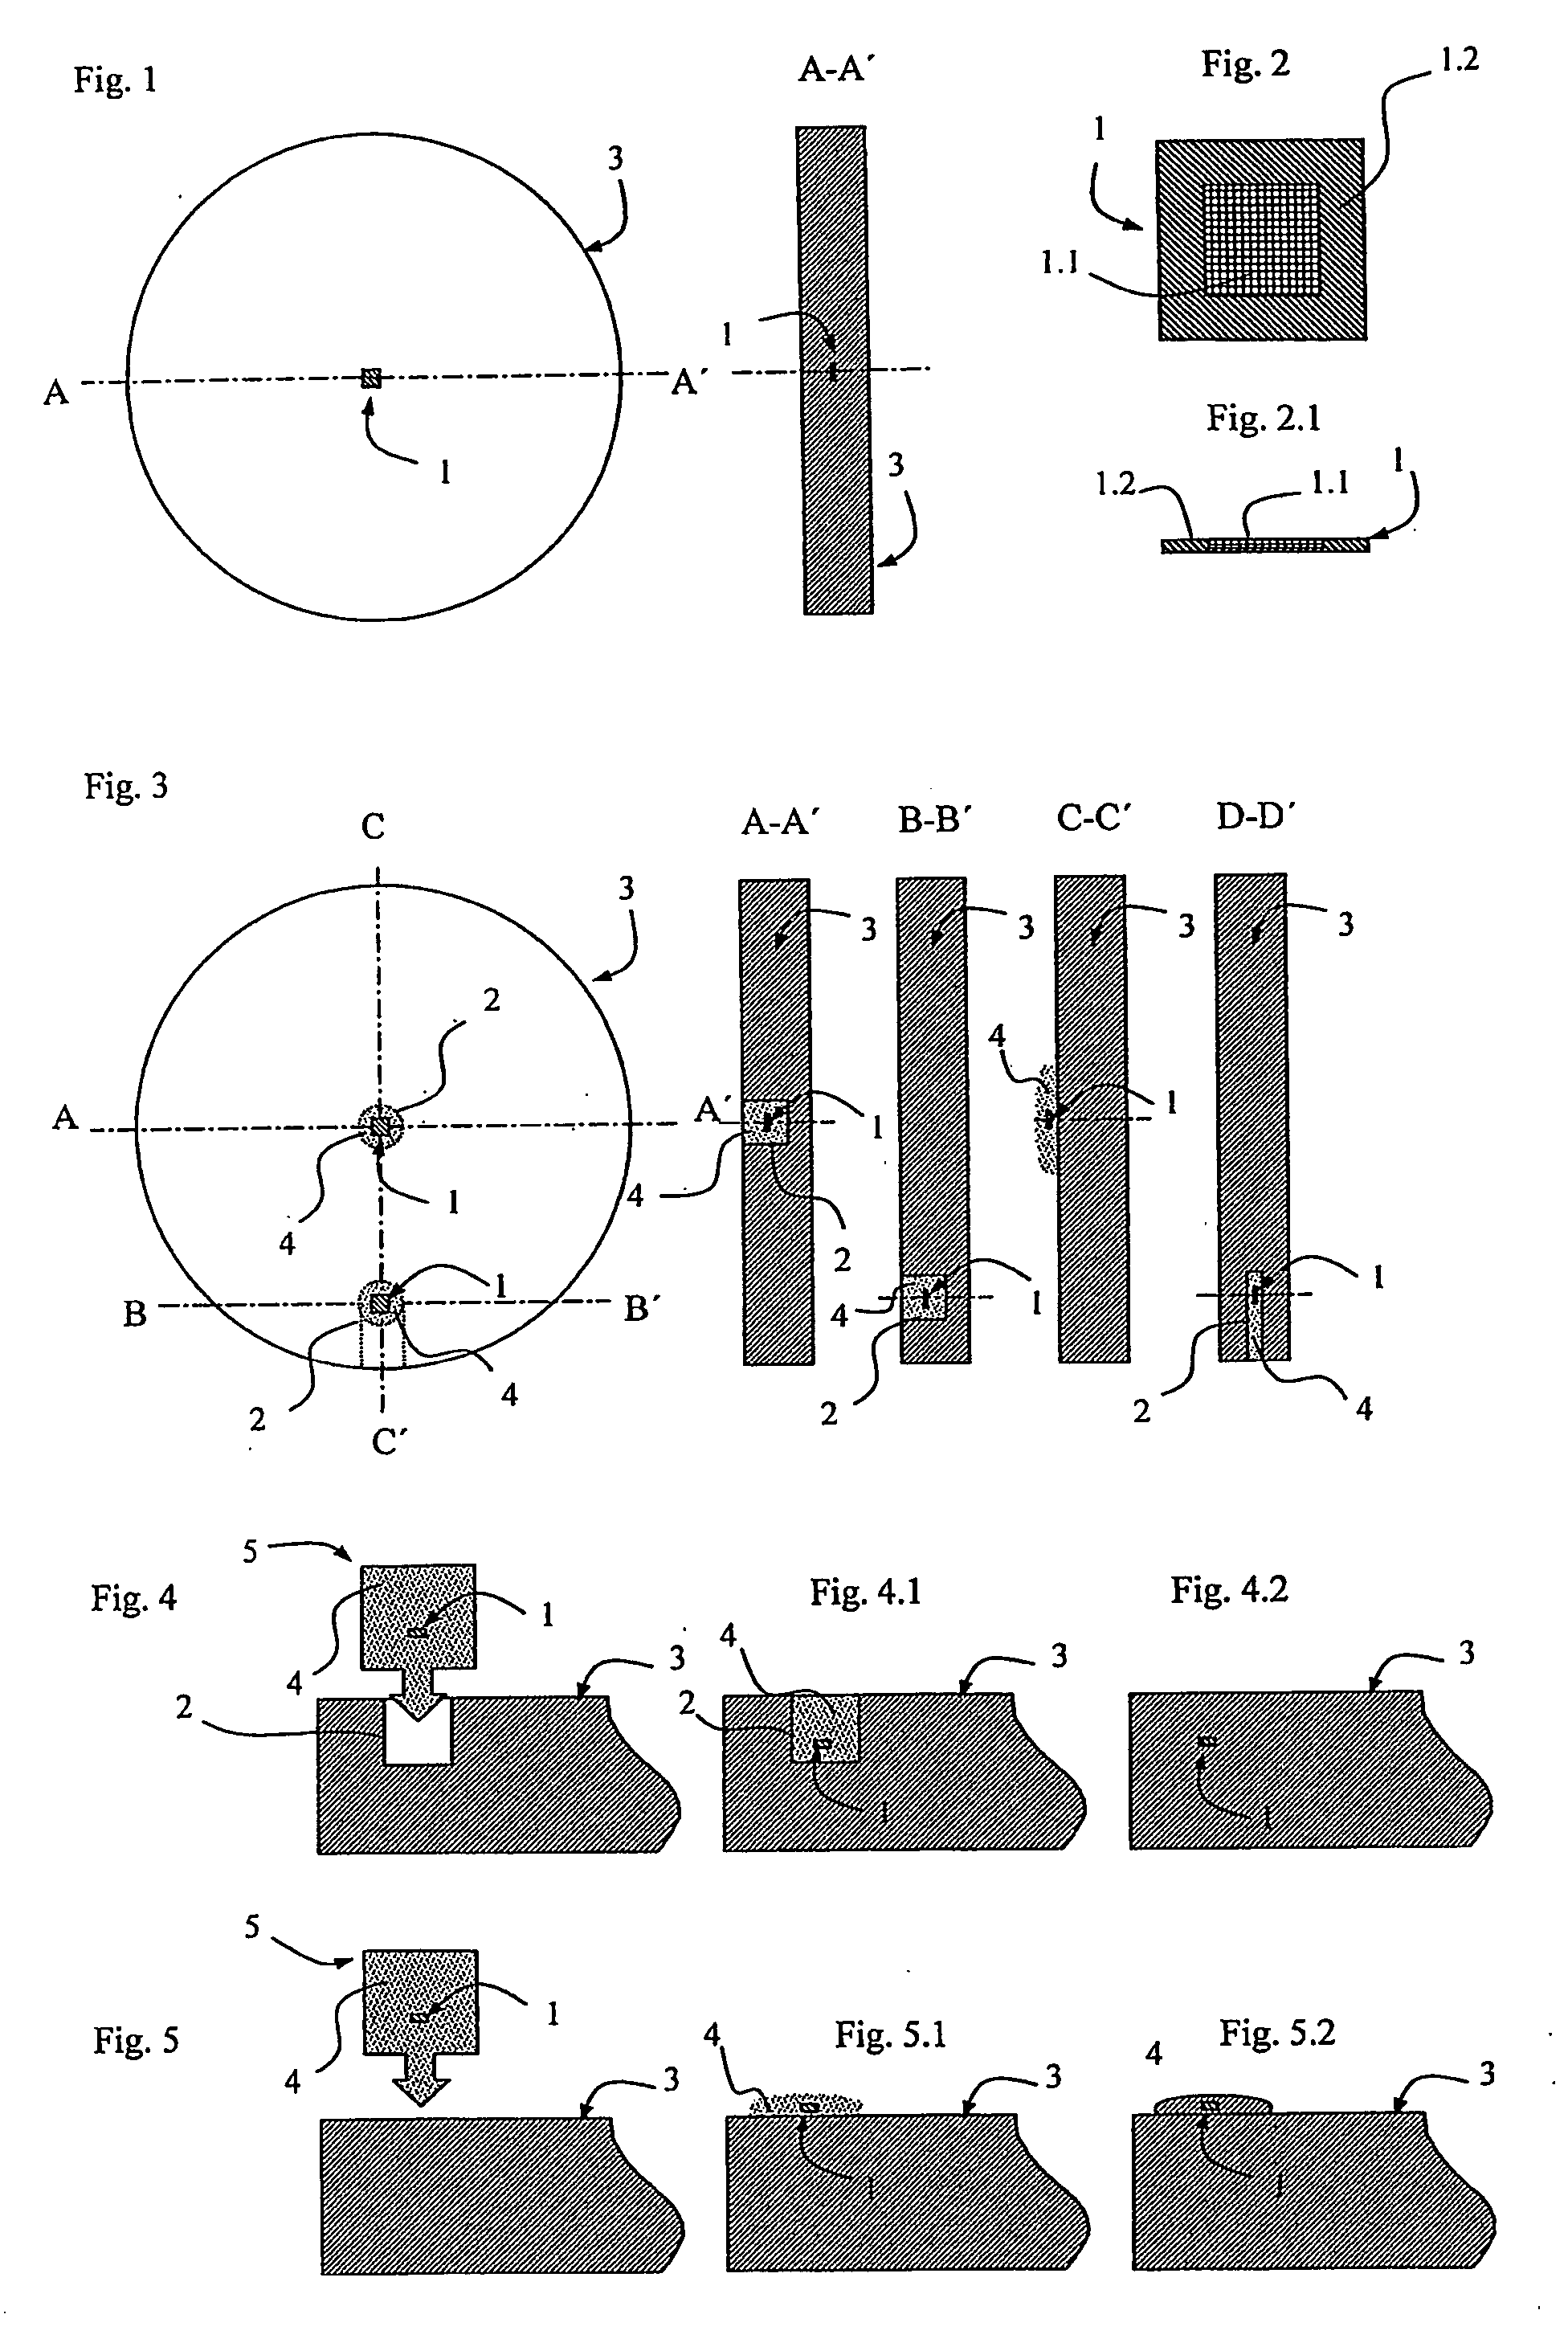 Method for integrating at least one electronic module in or on the glass of a watch and watch glass obtained by such a method